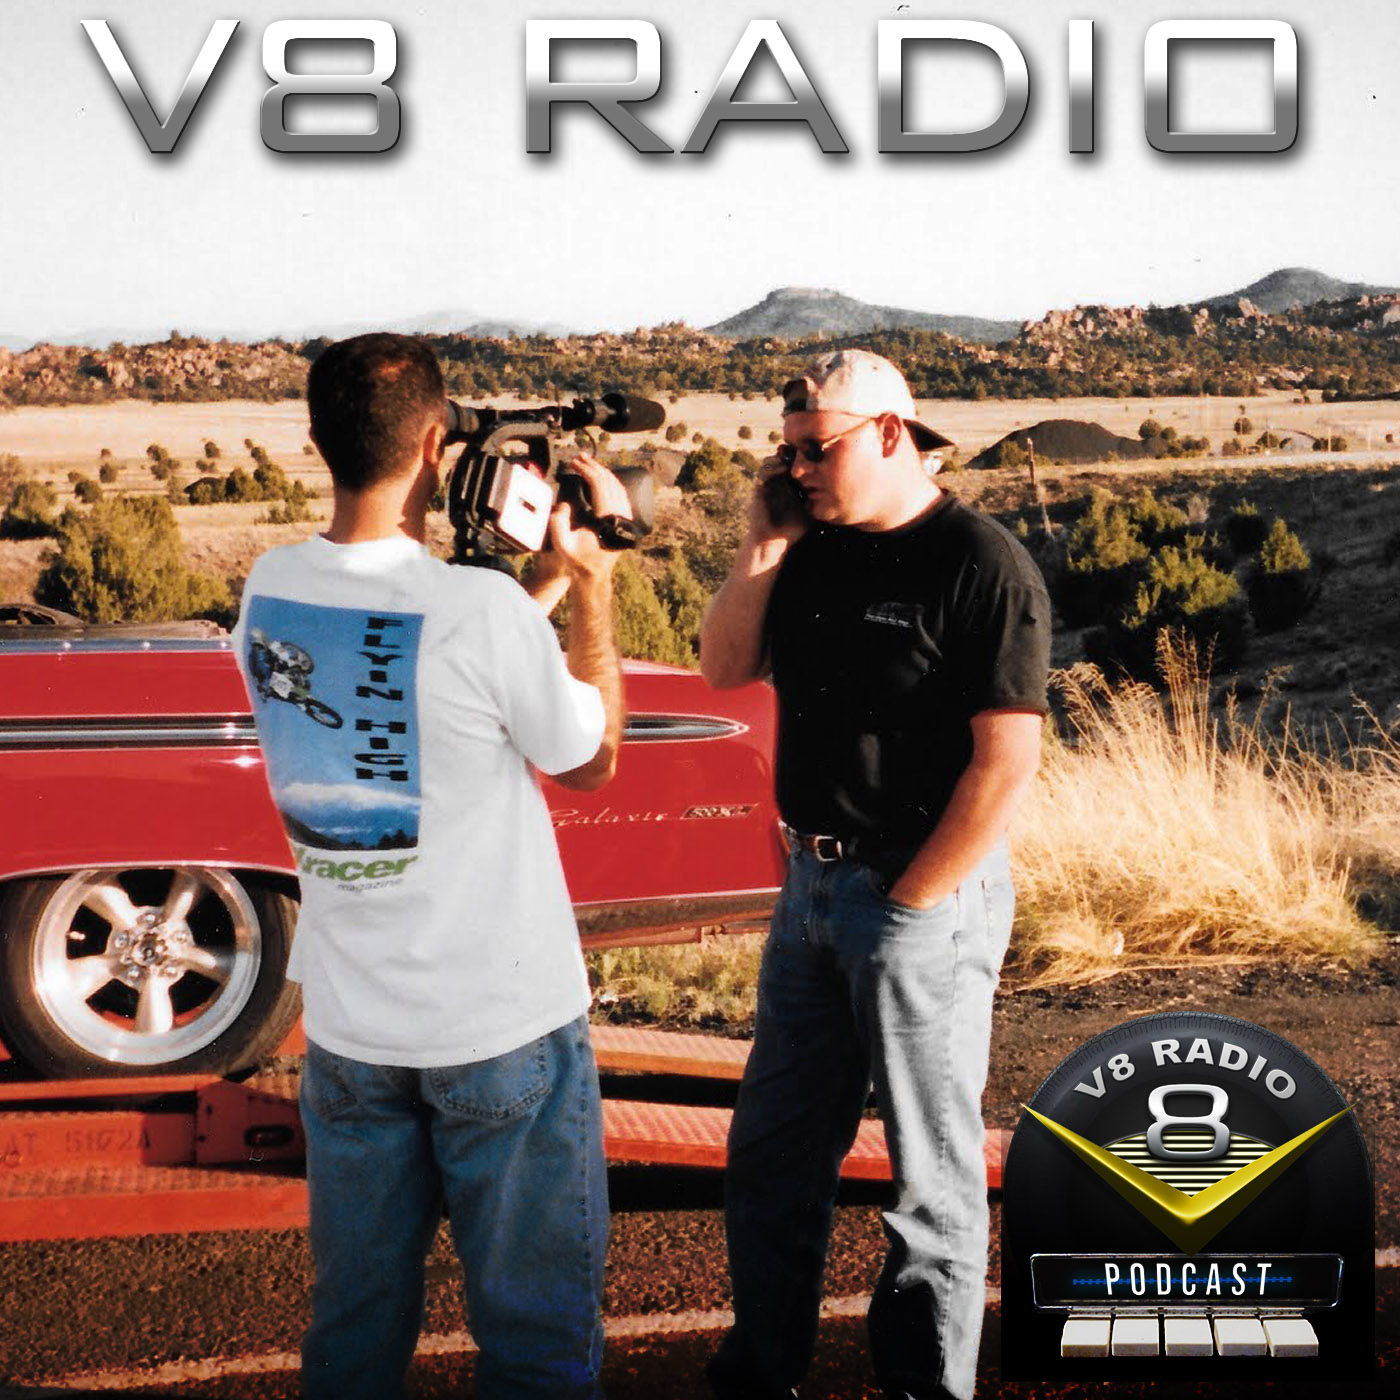 Car Enthusiasts Helping Each other, Drive In Cruise Returns, Automotive Trivia, and Much More on the V8 Radio Podcast